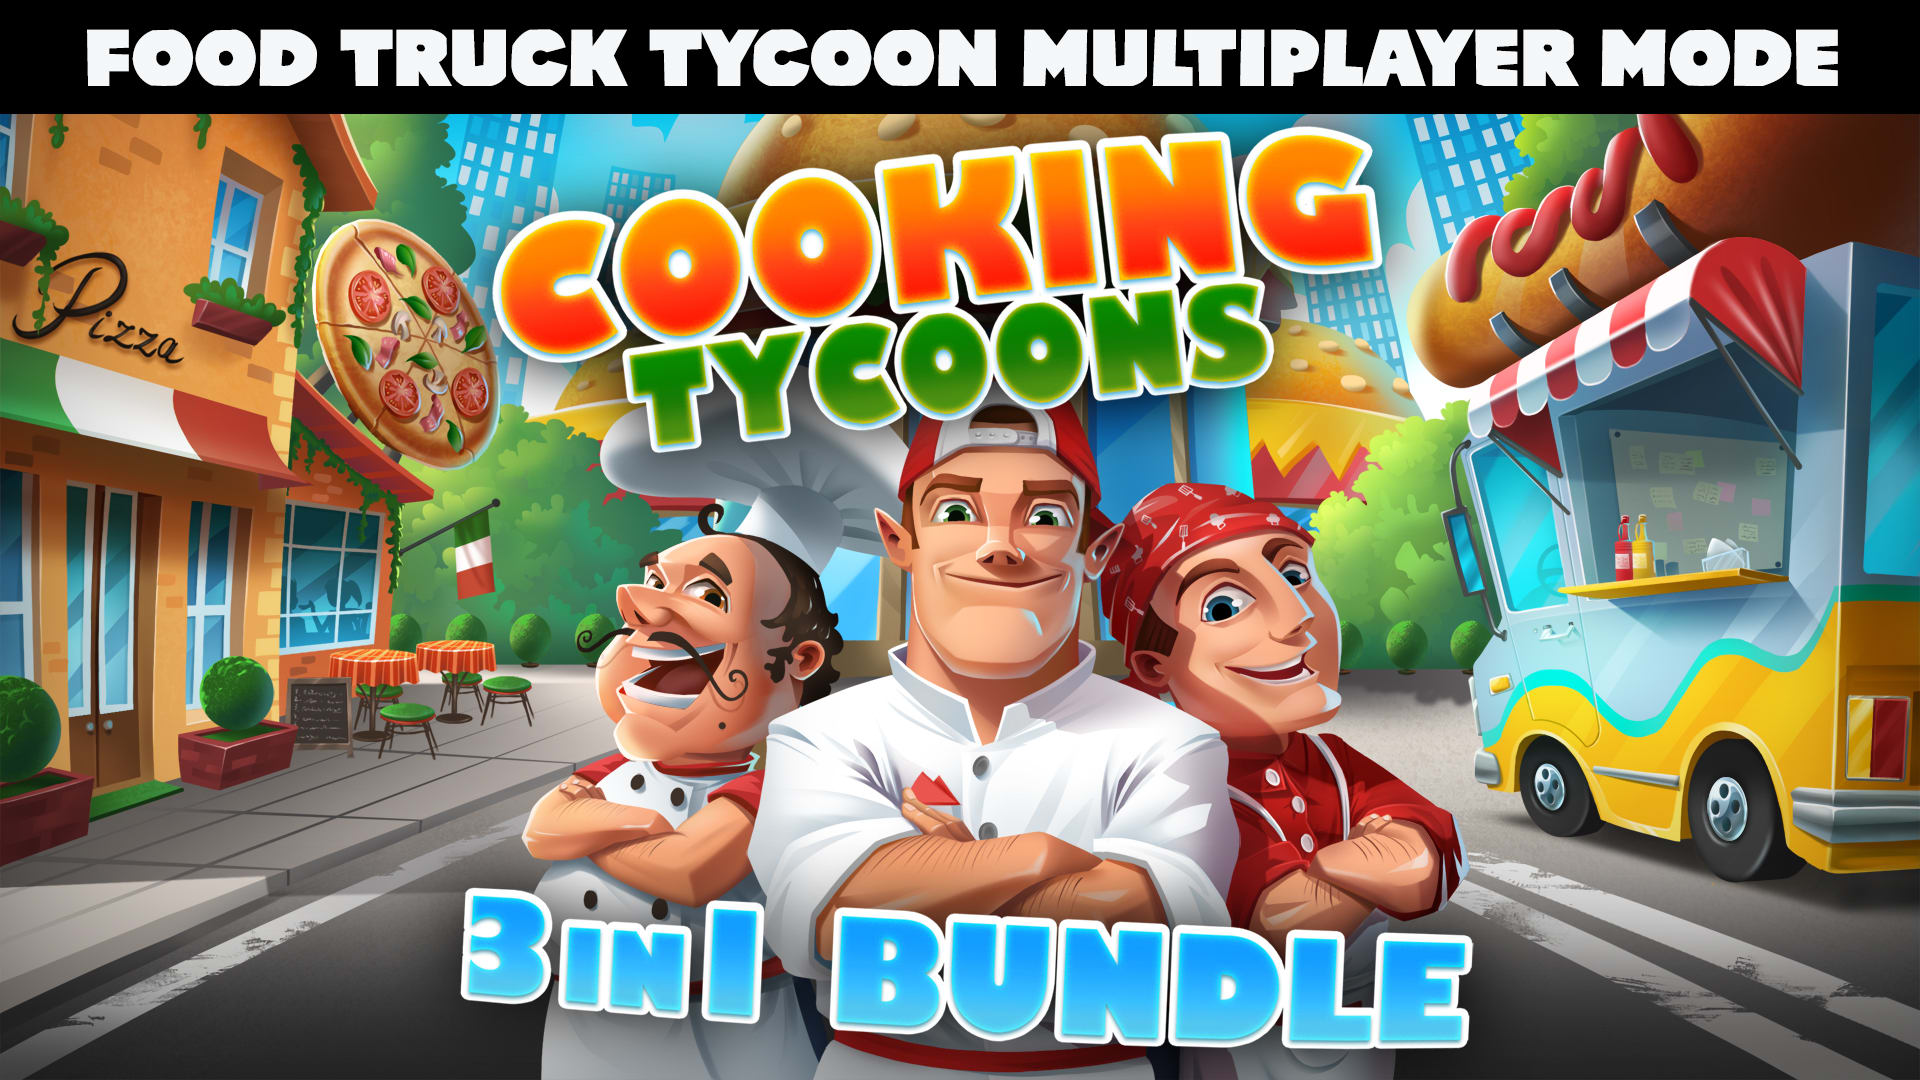 Cooking Tycoons: 3 in 1 Bundle - Food Truck Tycoon Multiplayer Mode 1